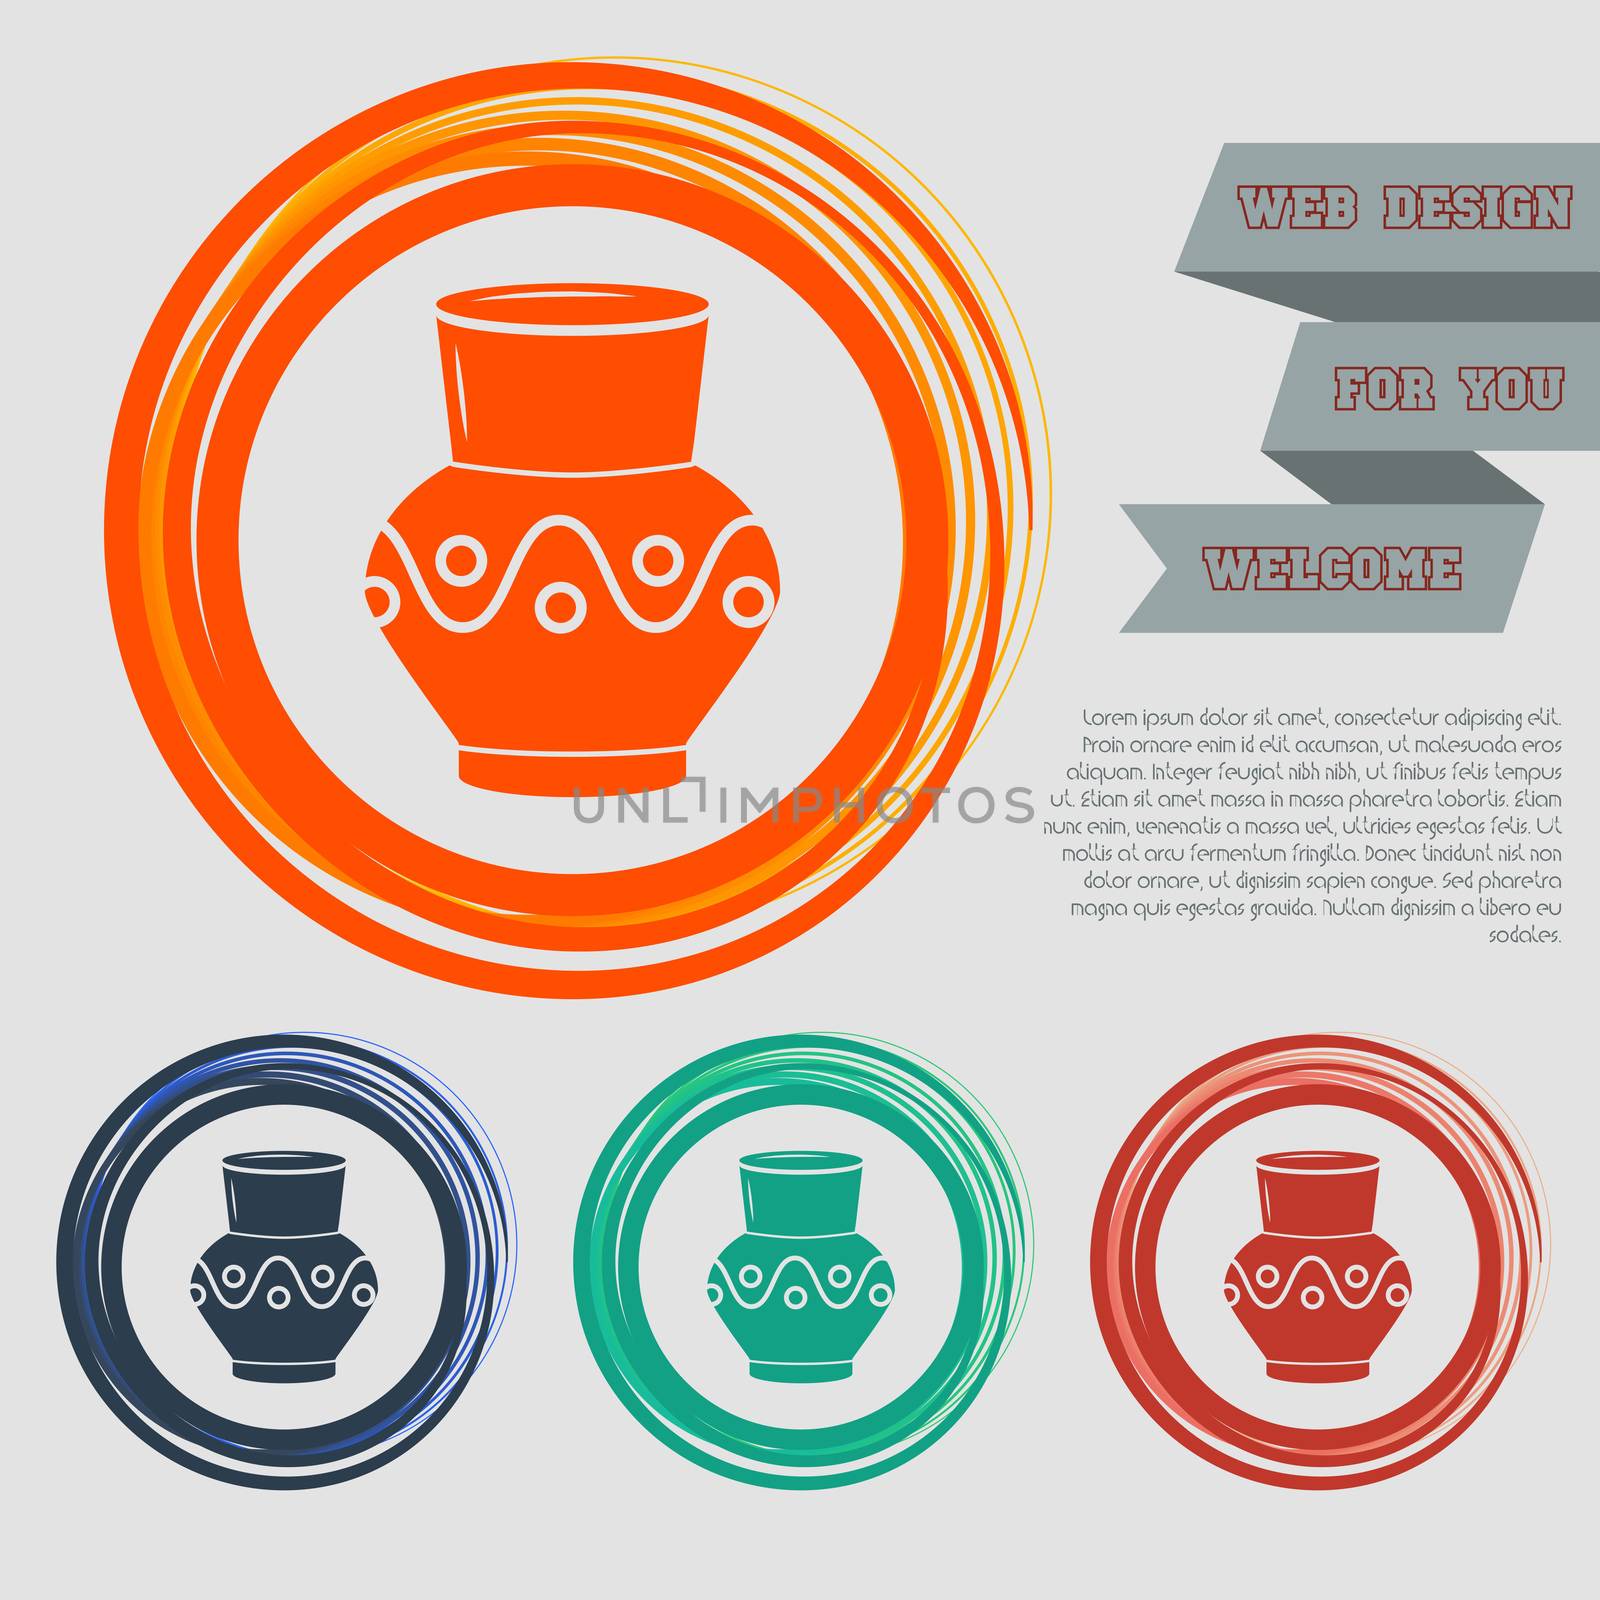 Vase, amphora icon on the red, blue, green, orange buttons for your website and design with space text.  by Adamchuk